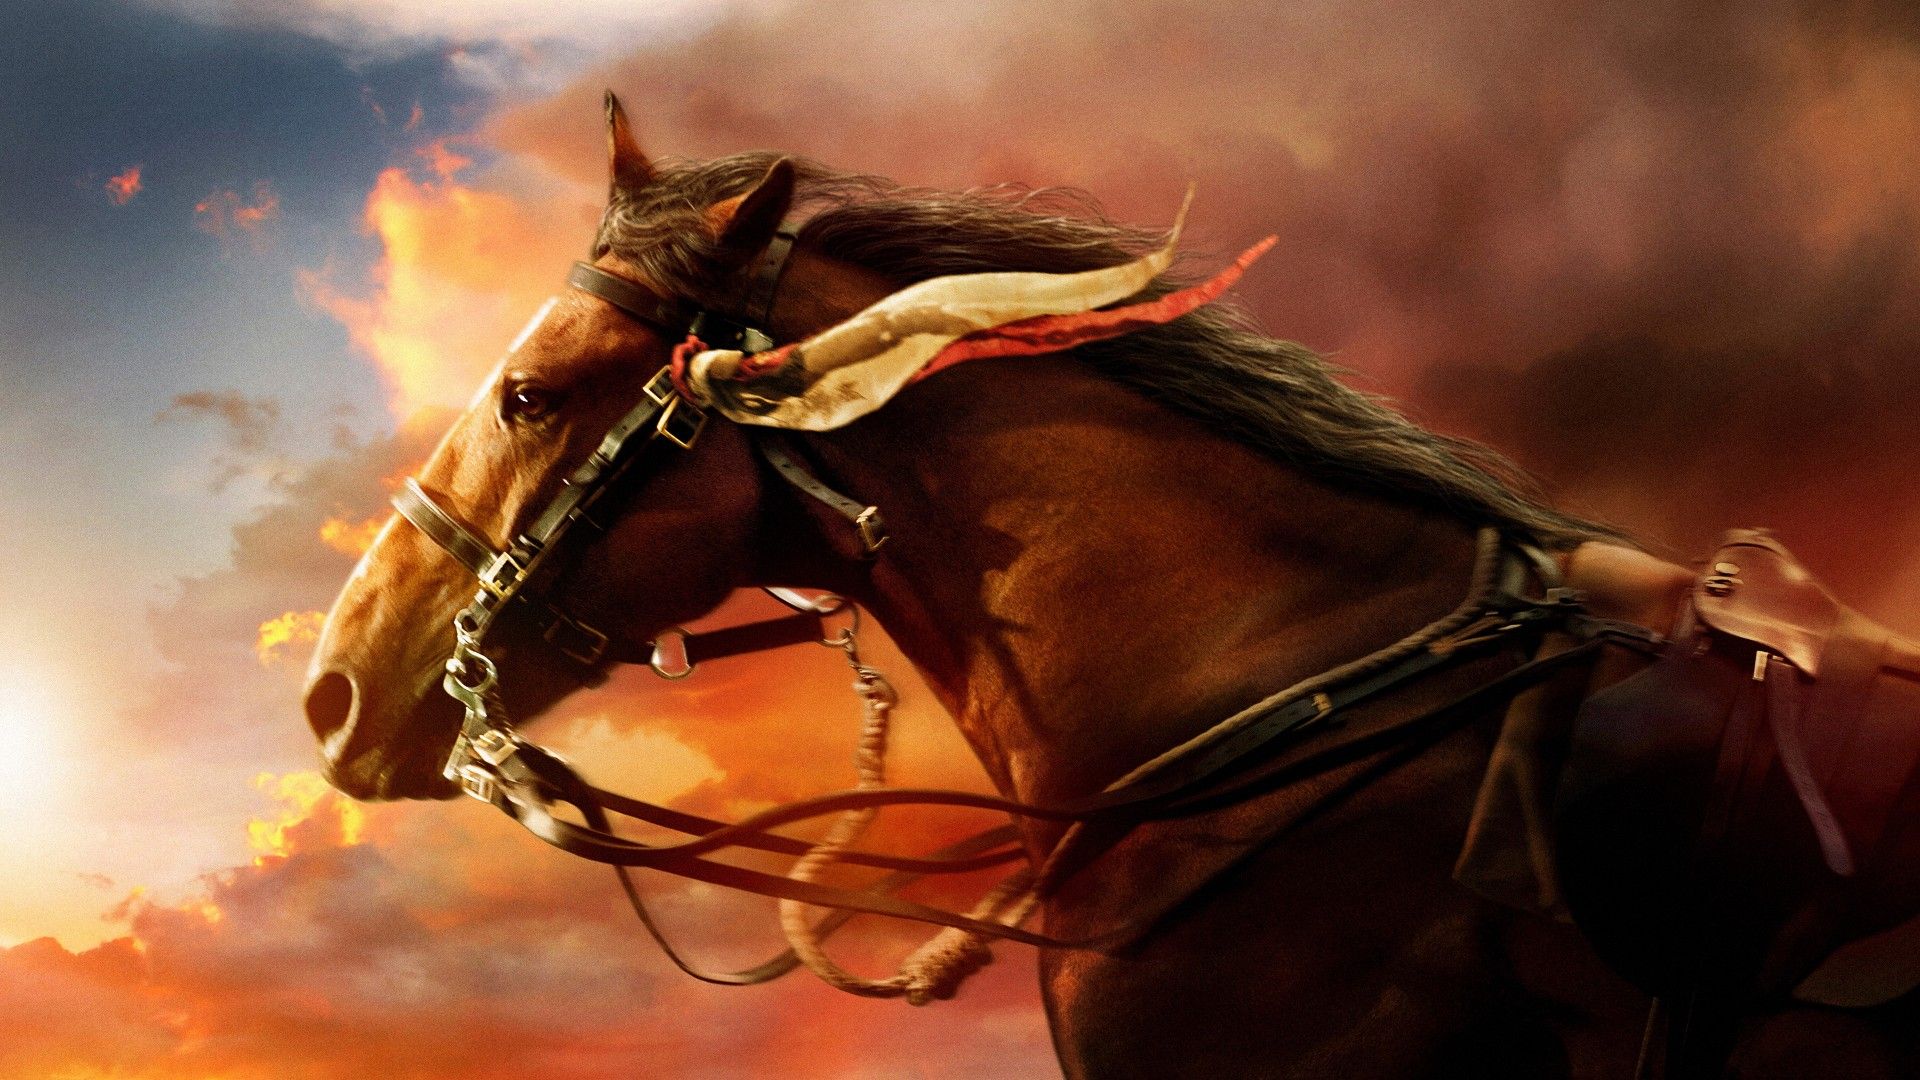 Red Horse wallpaper by Graphistun1919 - Download on ZEDGE™ | df7e